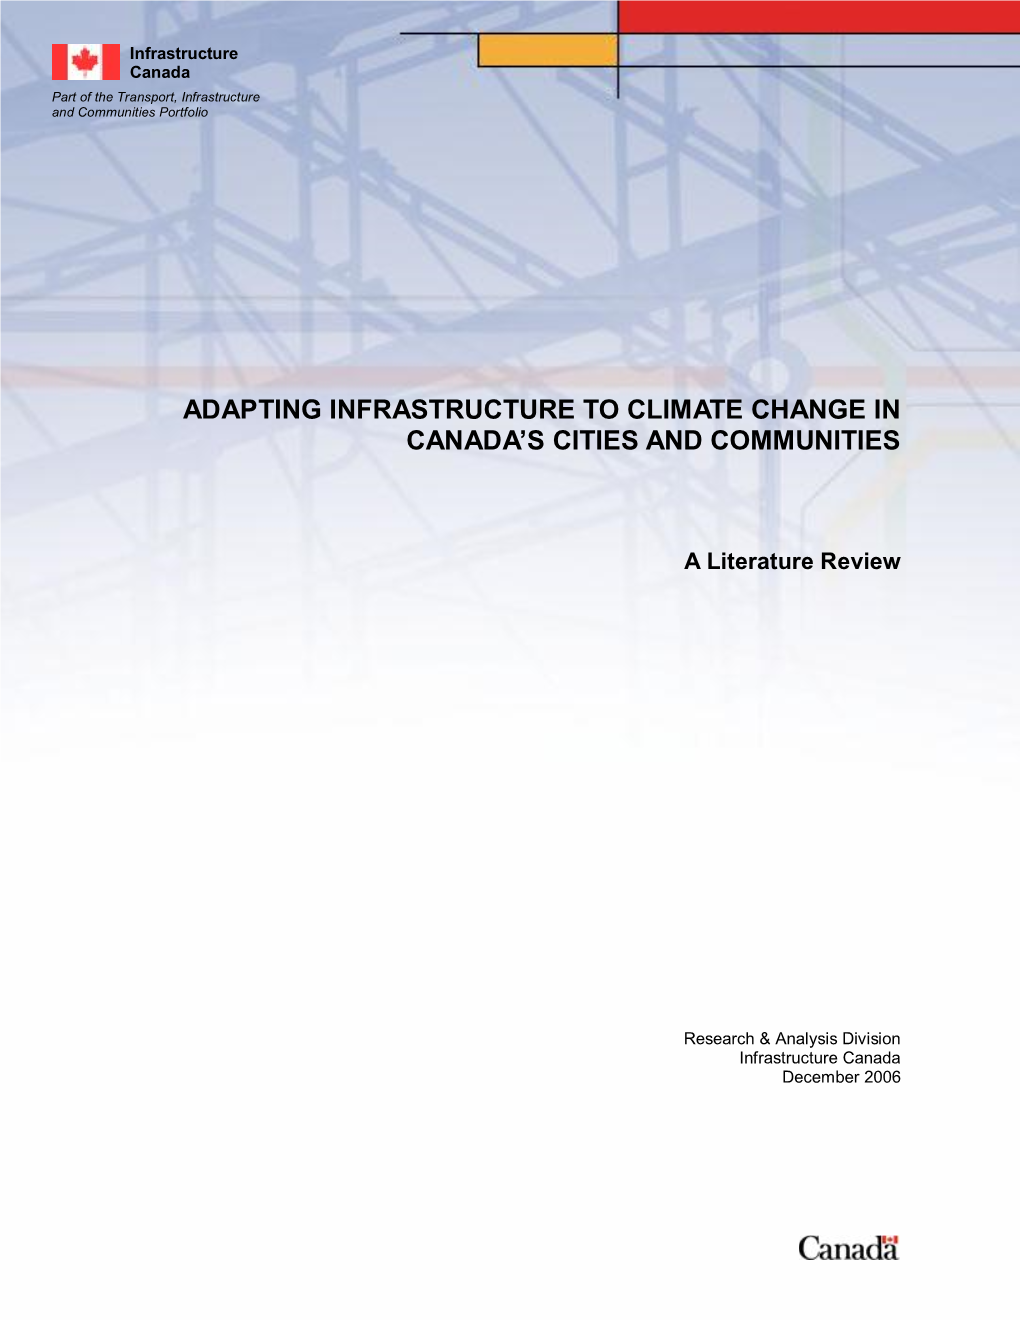 Adapting Infrastructure to Climate Change in Canada's